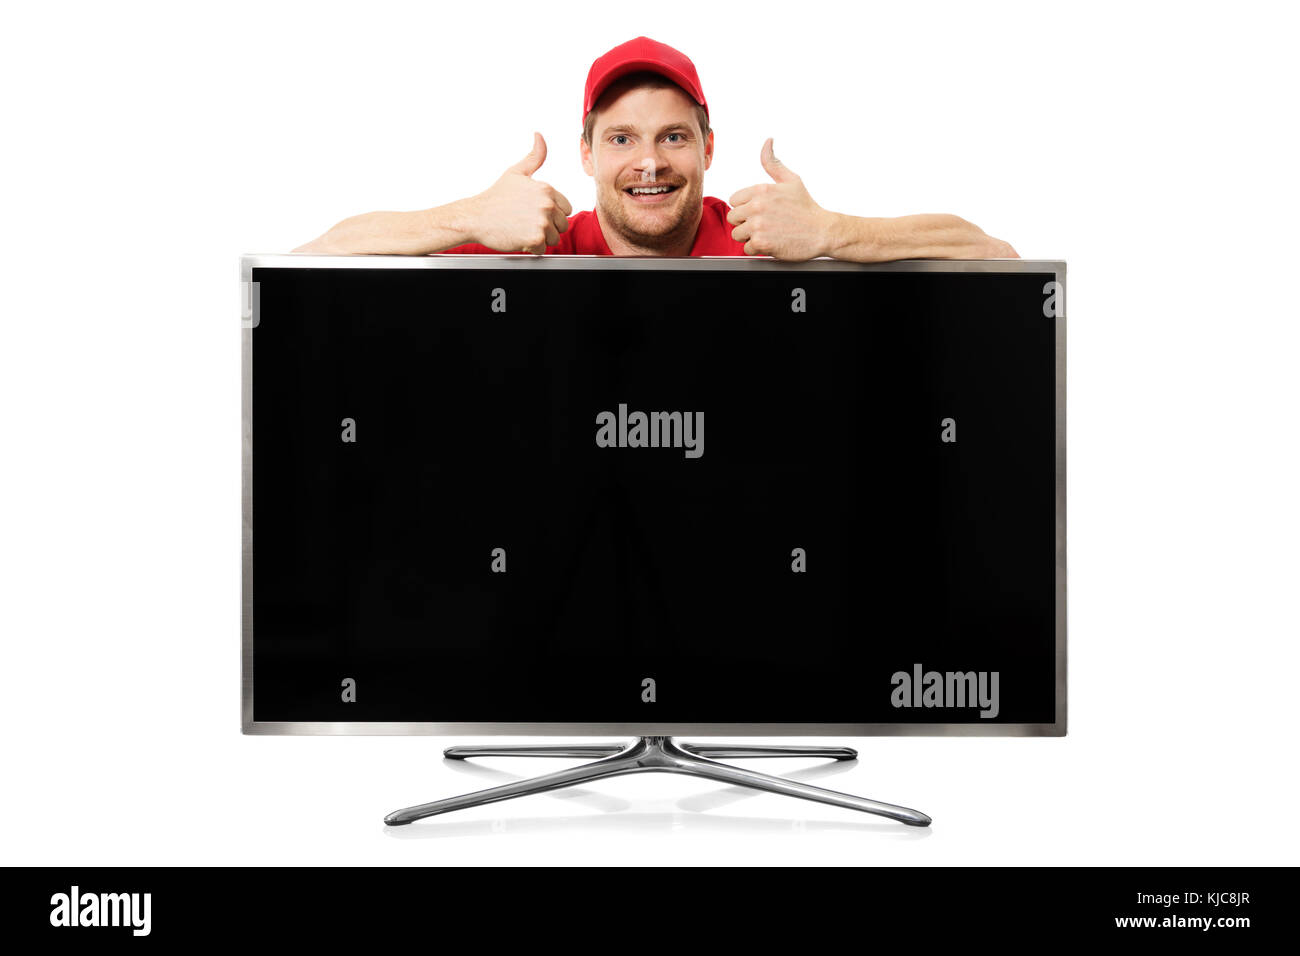 big blank tv and smiling man with thumbs up isolated on white background Stock Photo